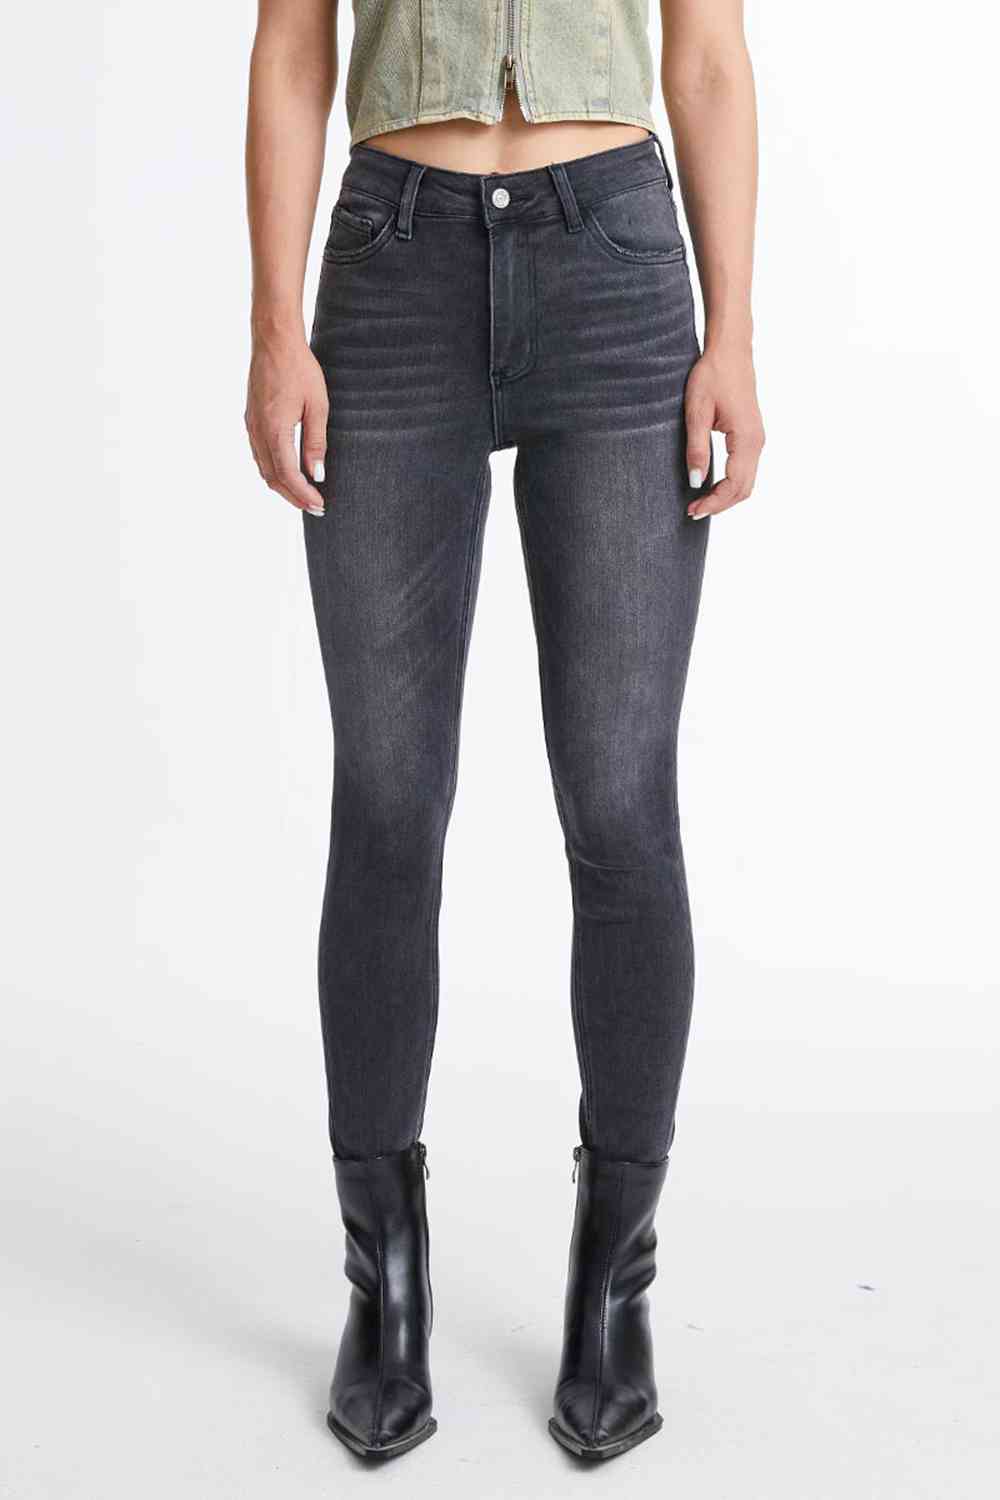 BAYEAS Cropped Skinny Jeans  | KIKI COUTURE